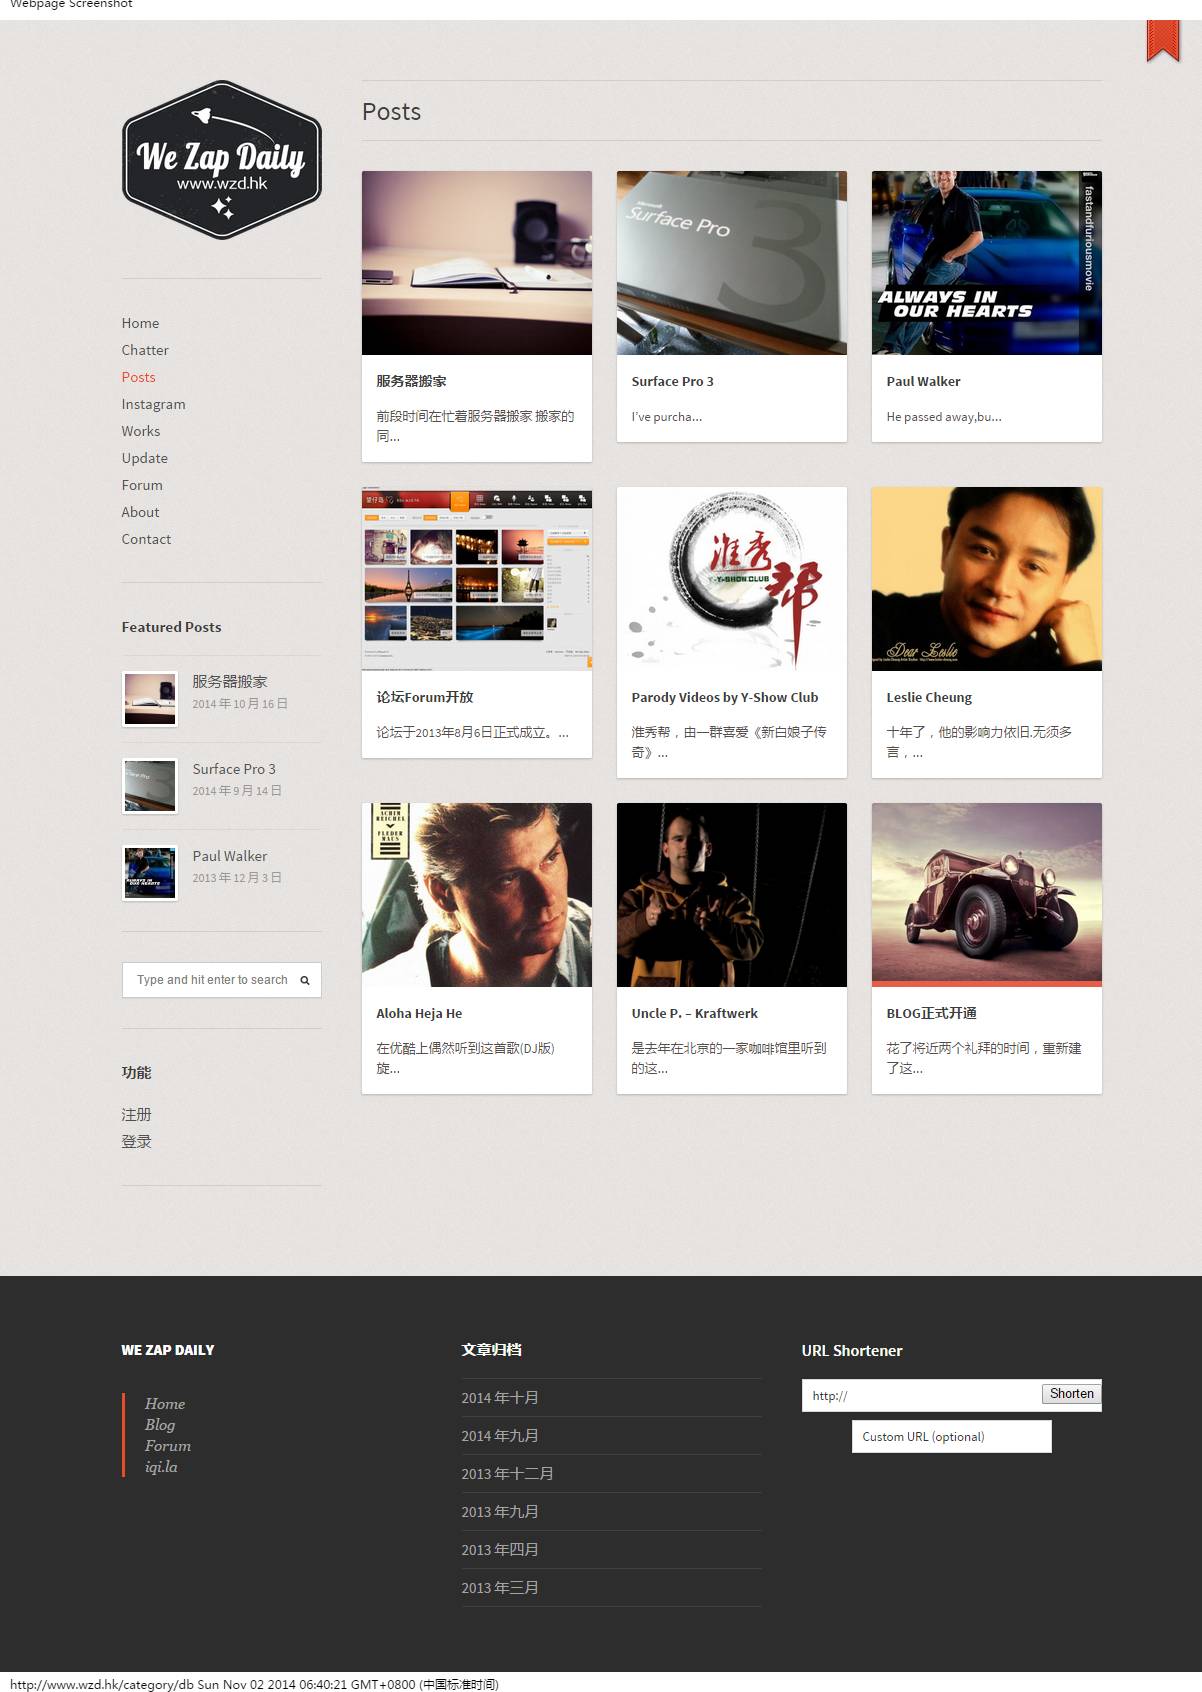 The Screenshot of Posts page